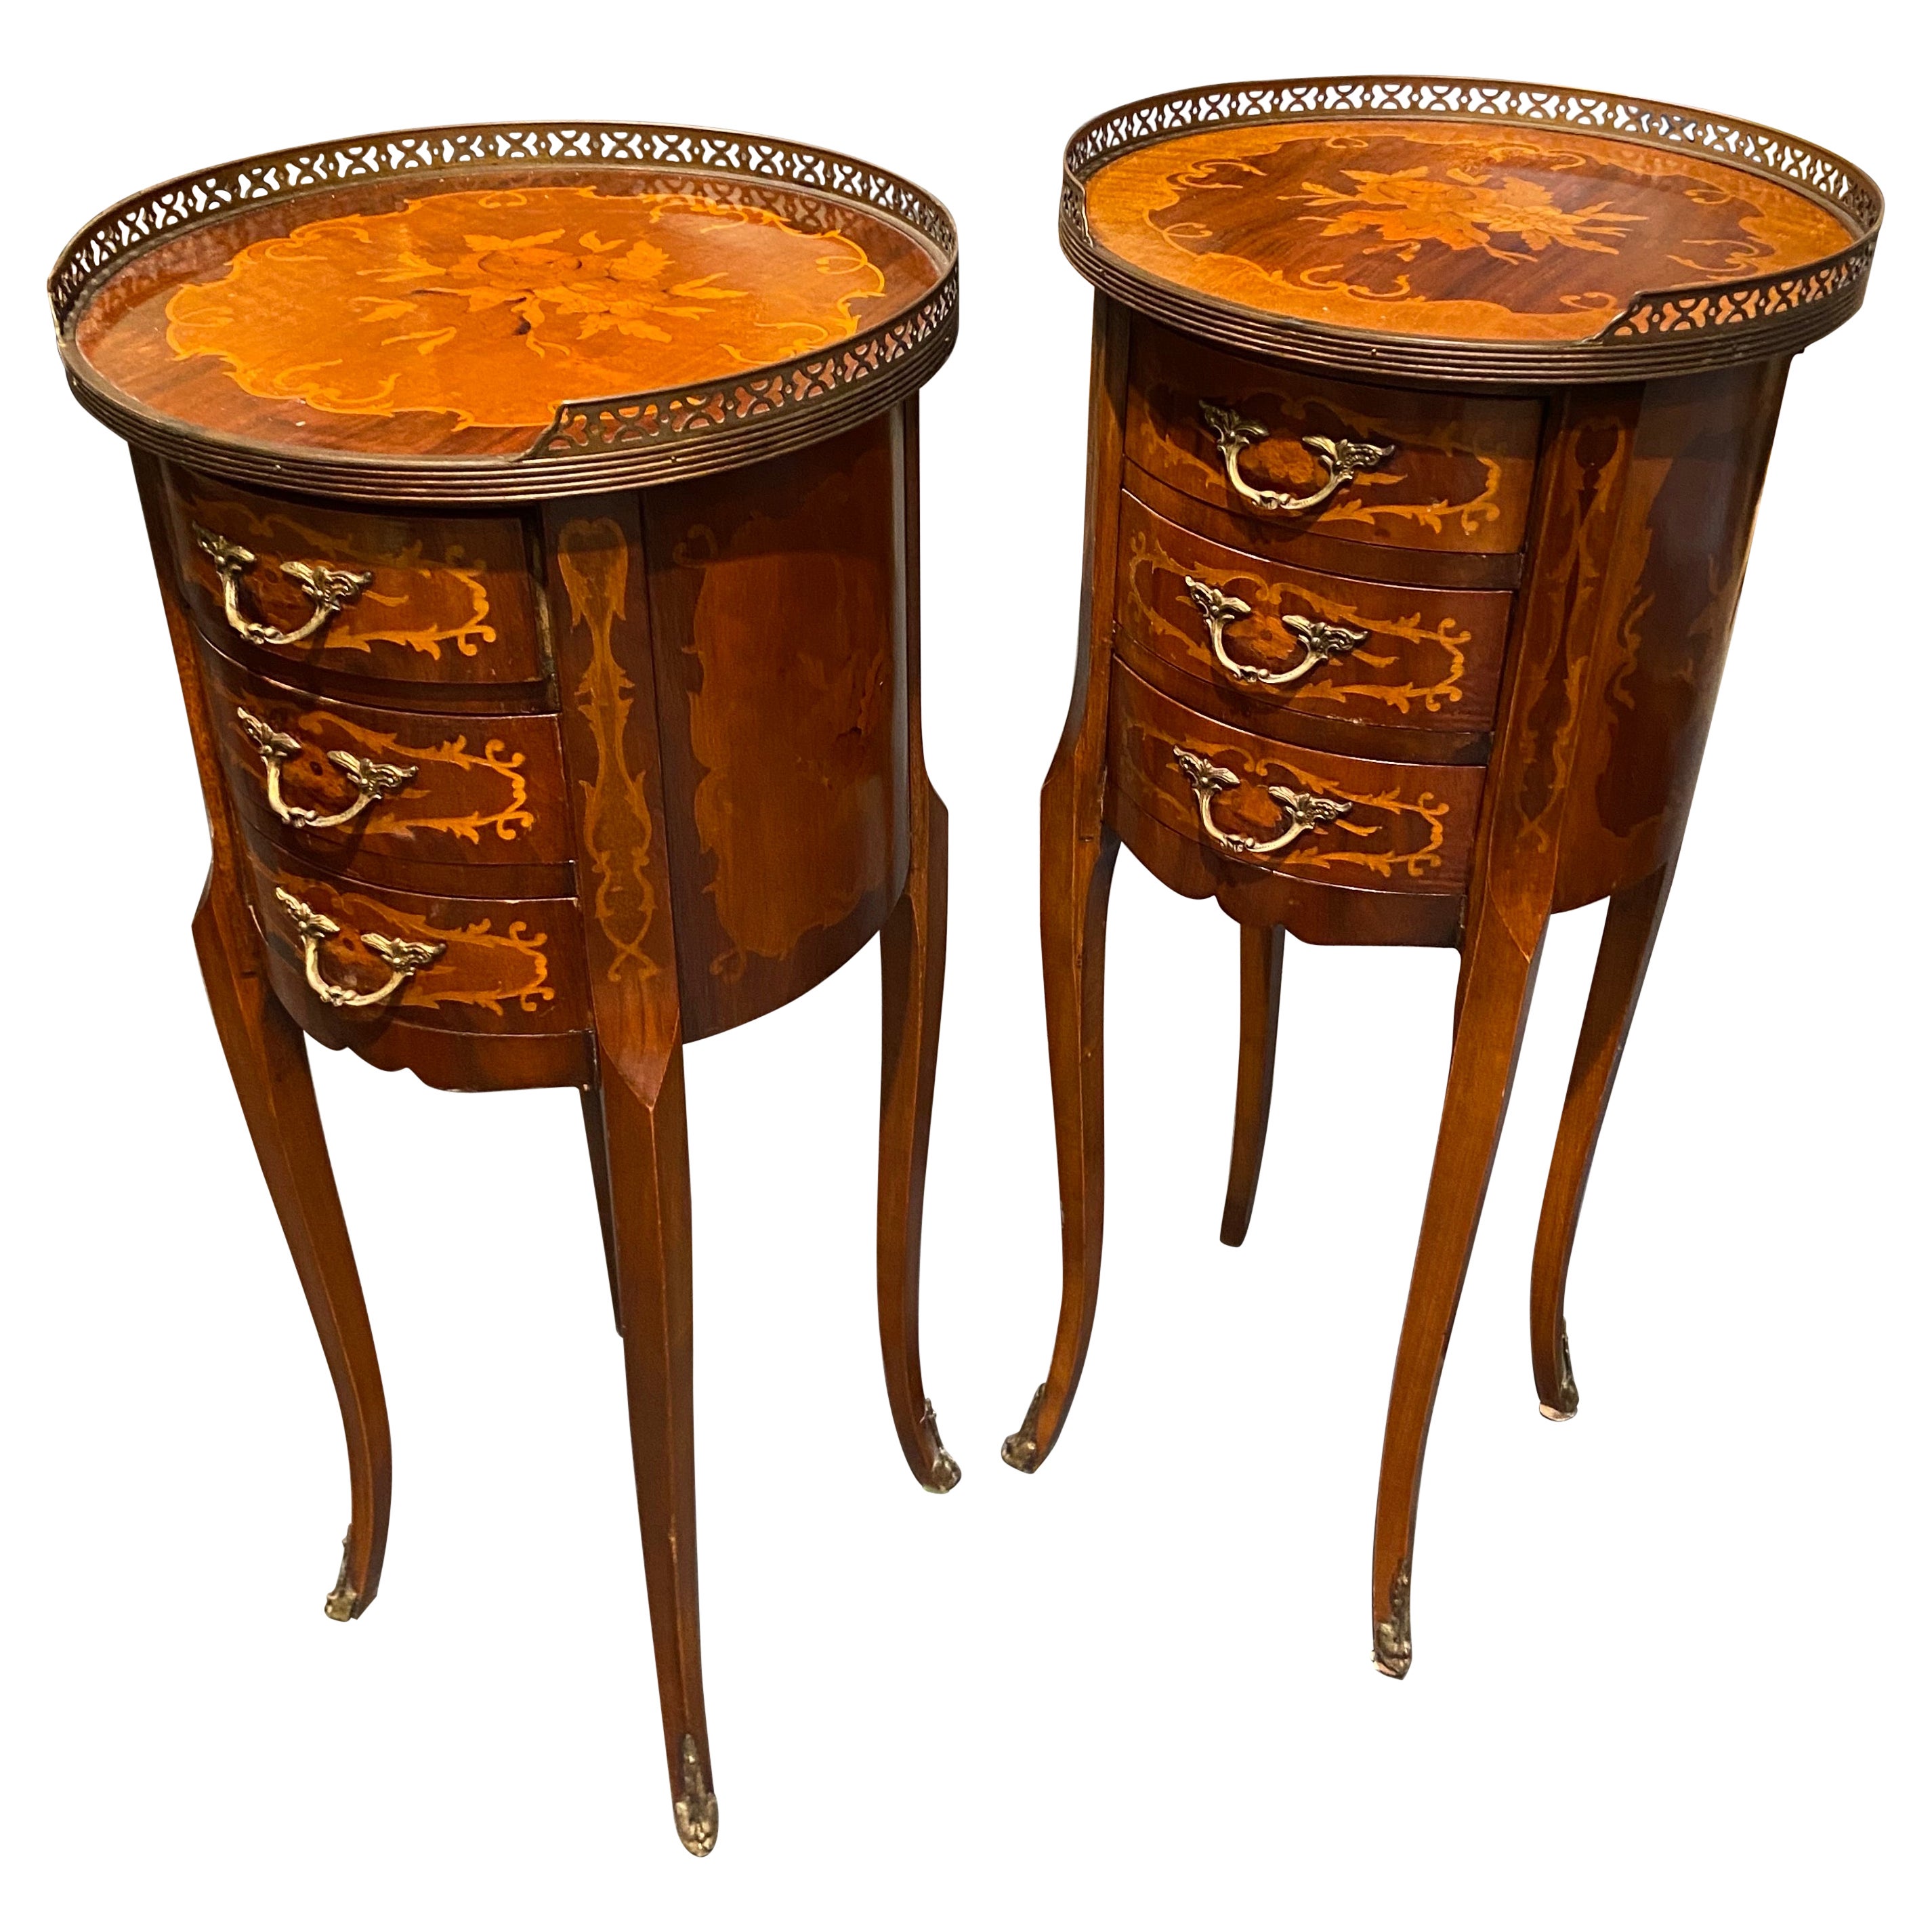 19th Century French Mahogany Inlaid Side Tables in Louis XVI Style